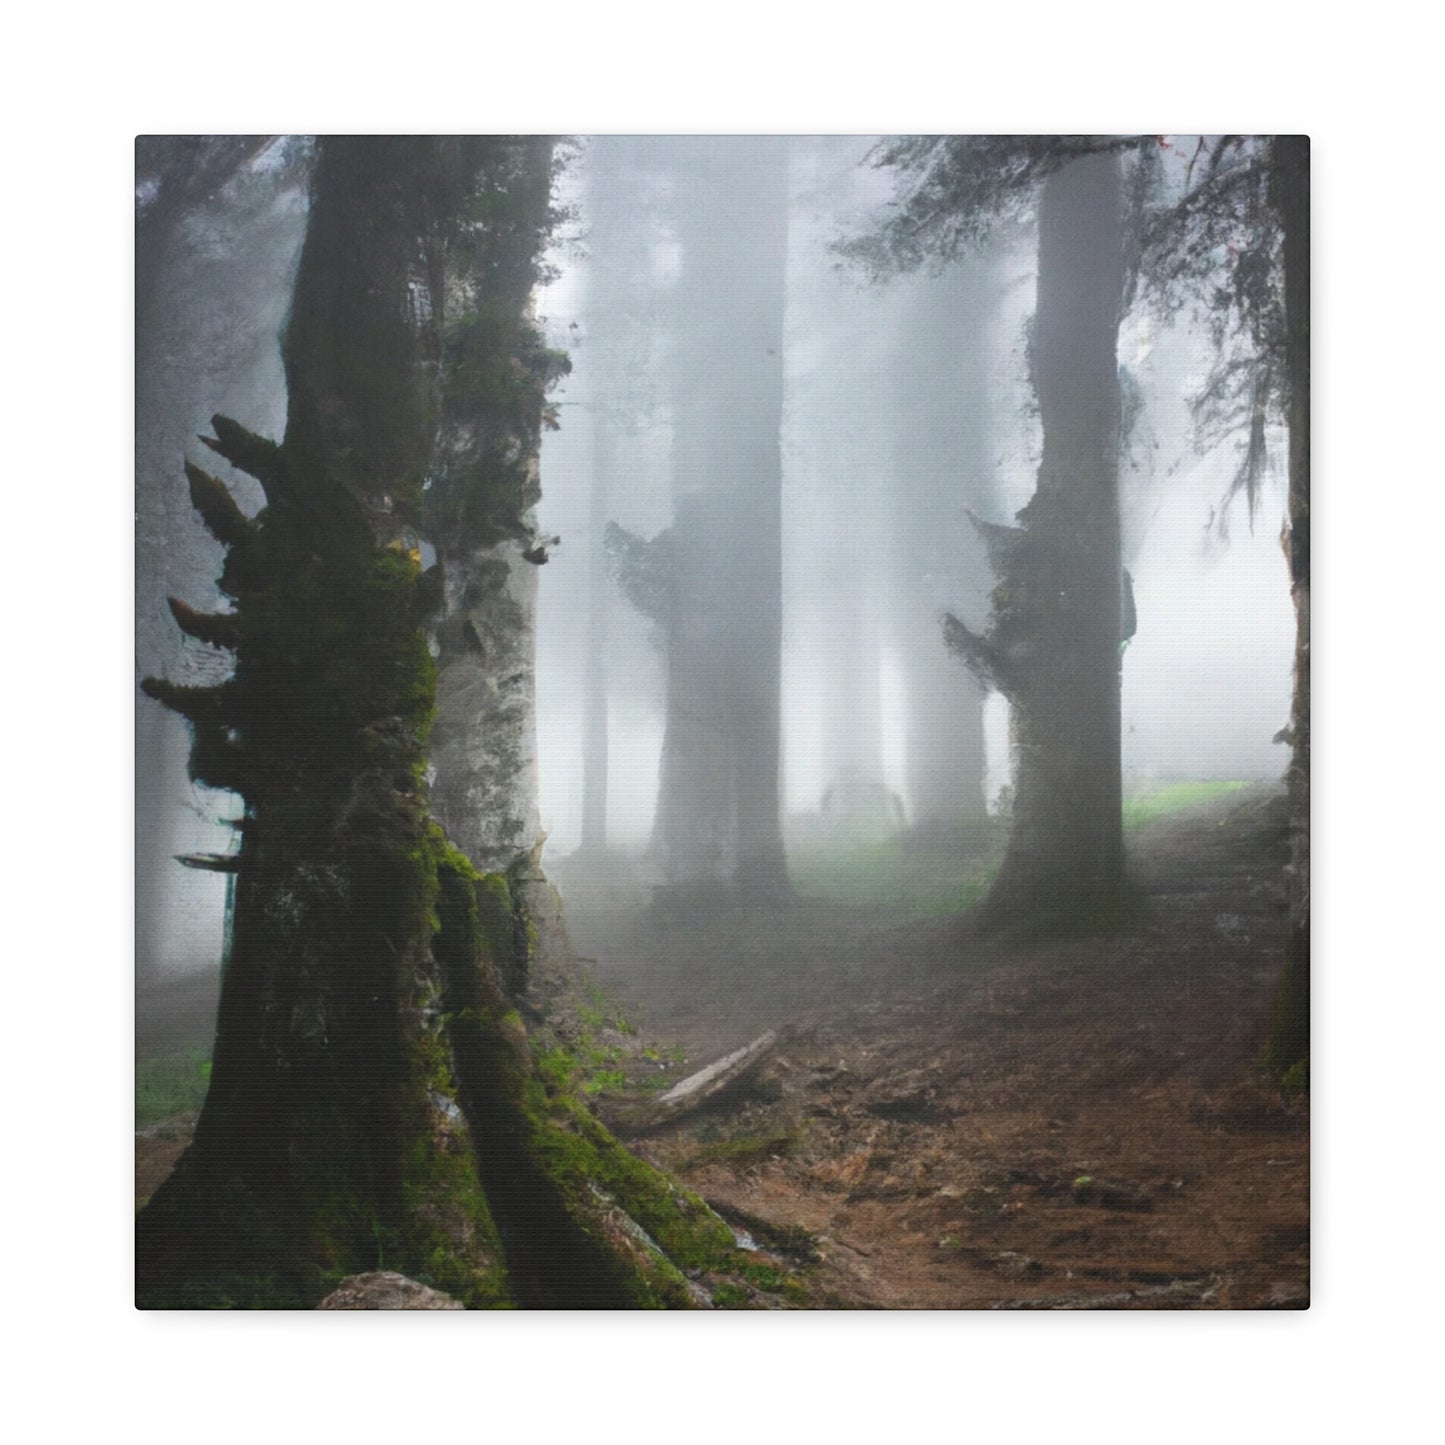 Quality canvas print of a serene, foggy forest with towering trees and lush moss, framed in ethically sourced radial pine. Multiple orientation options available, ideal for custom artwork or photos.